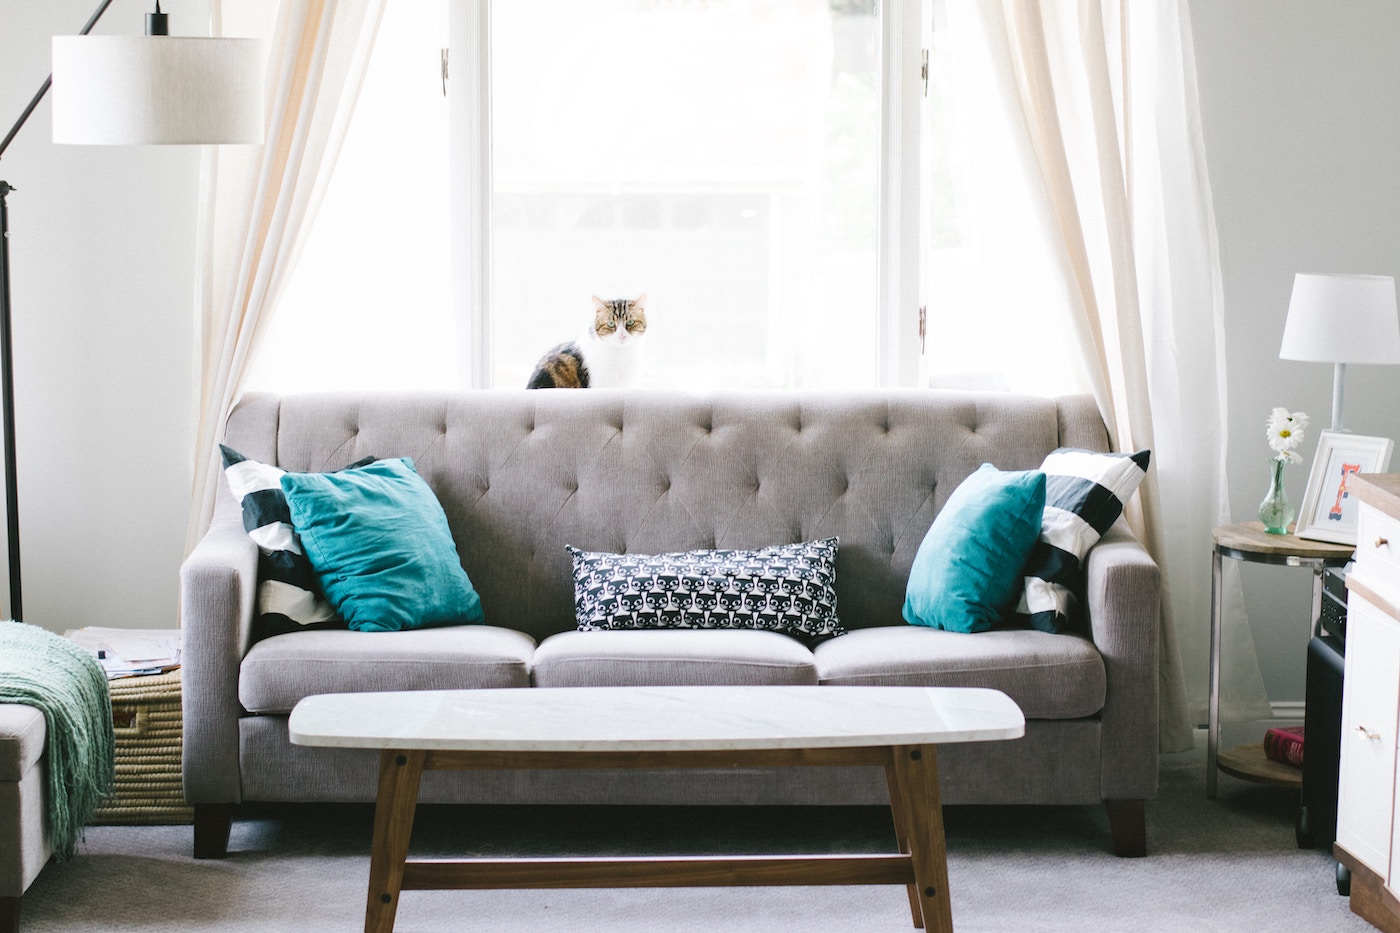 Living room with a gray couch and turquoise pillows